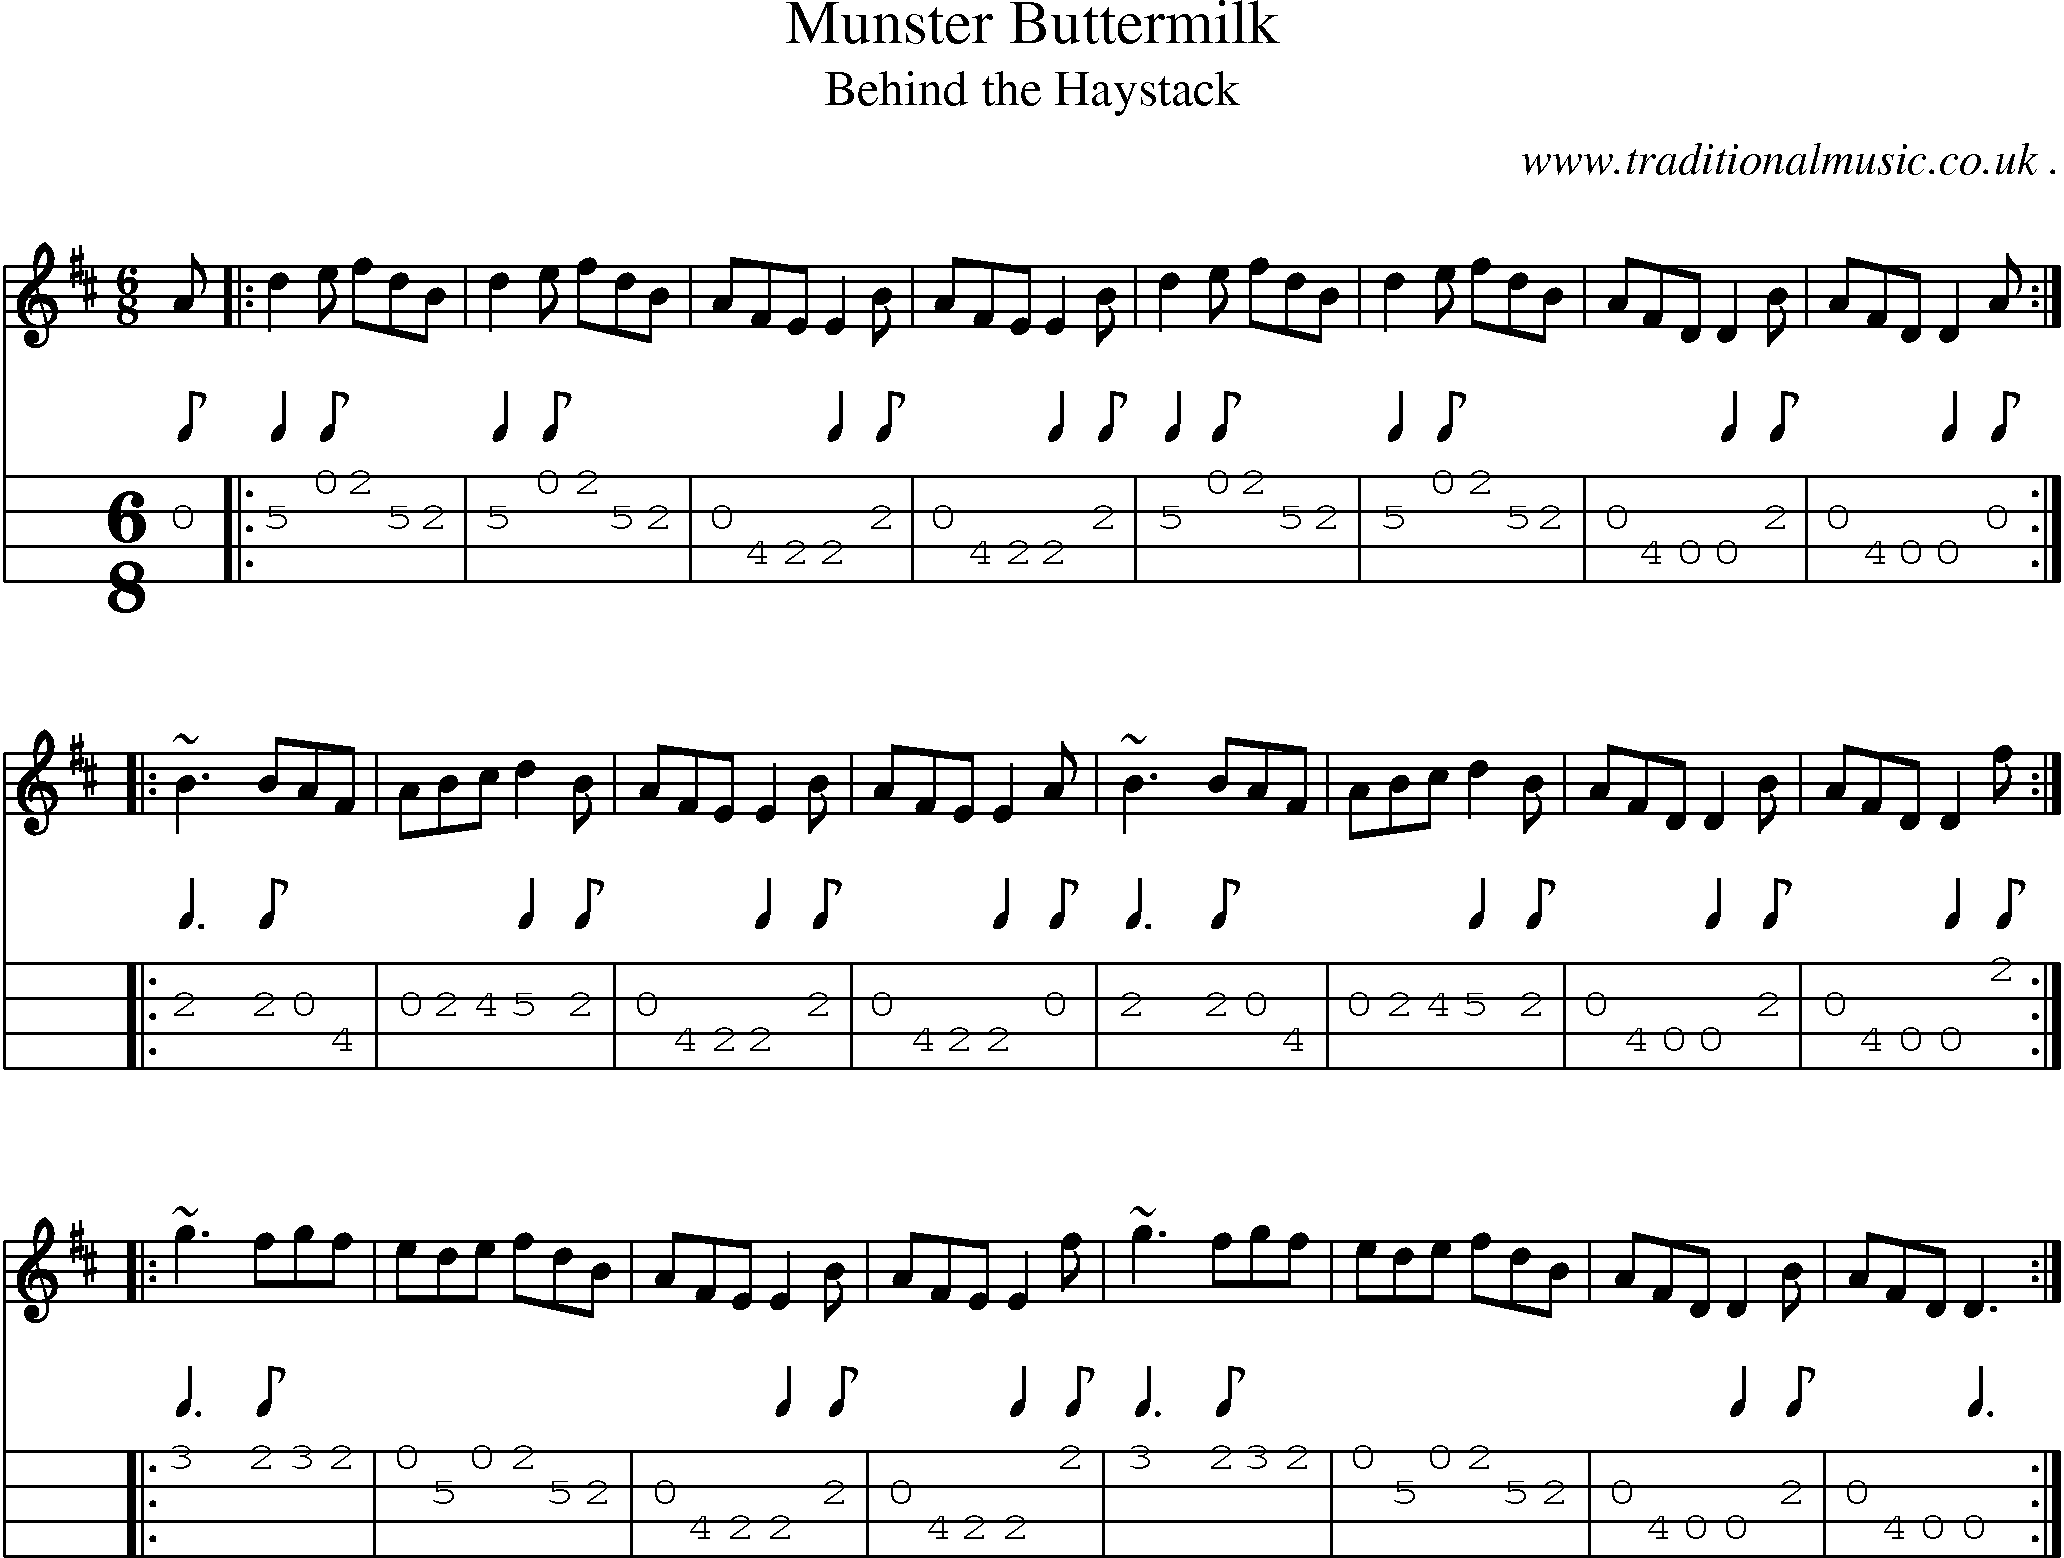 Sheet-music  score, Chords and Mandolin Tabs for Munster Buttermilk